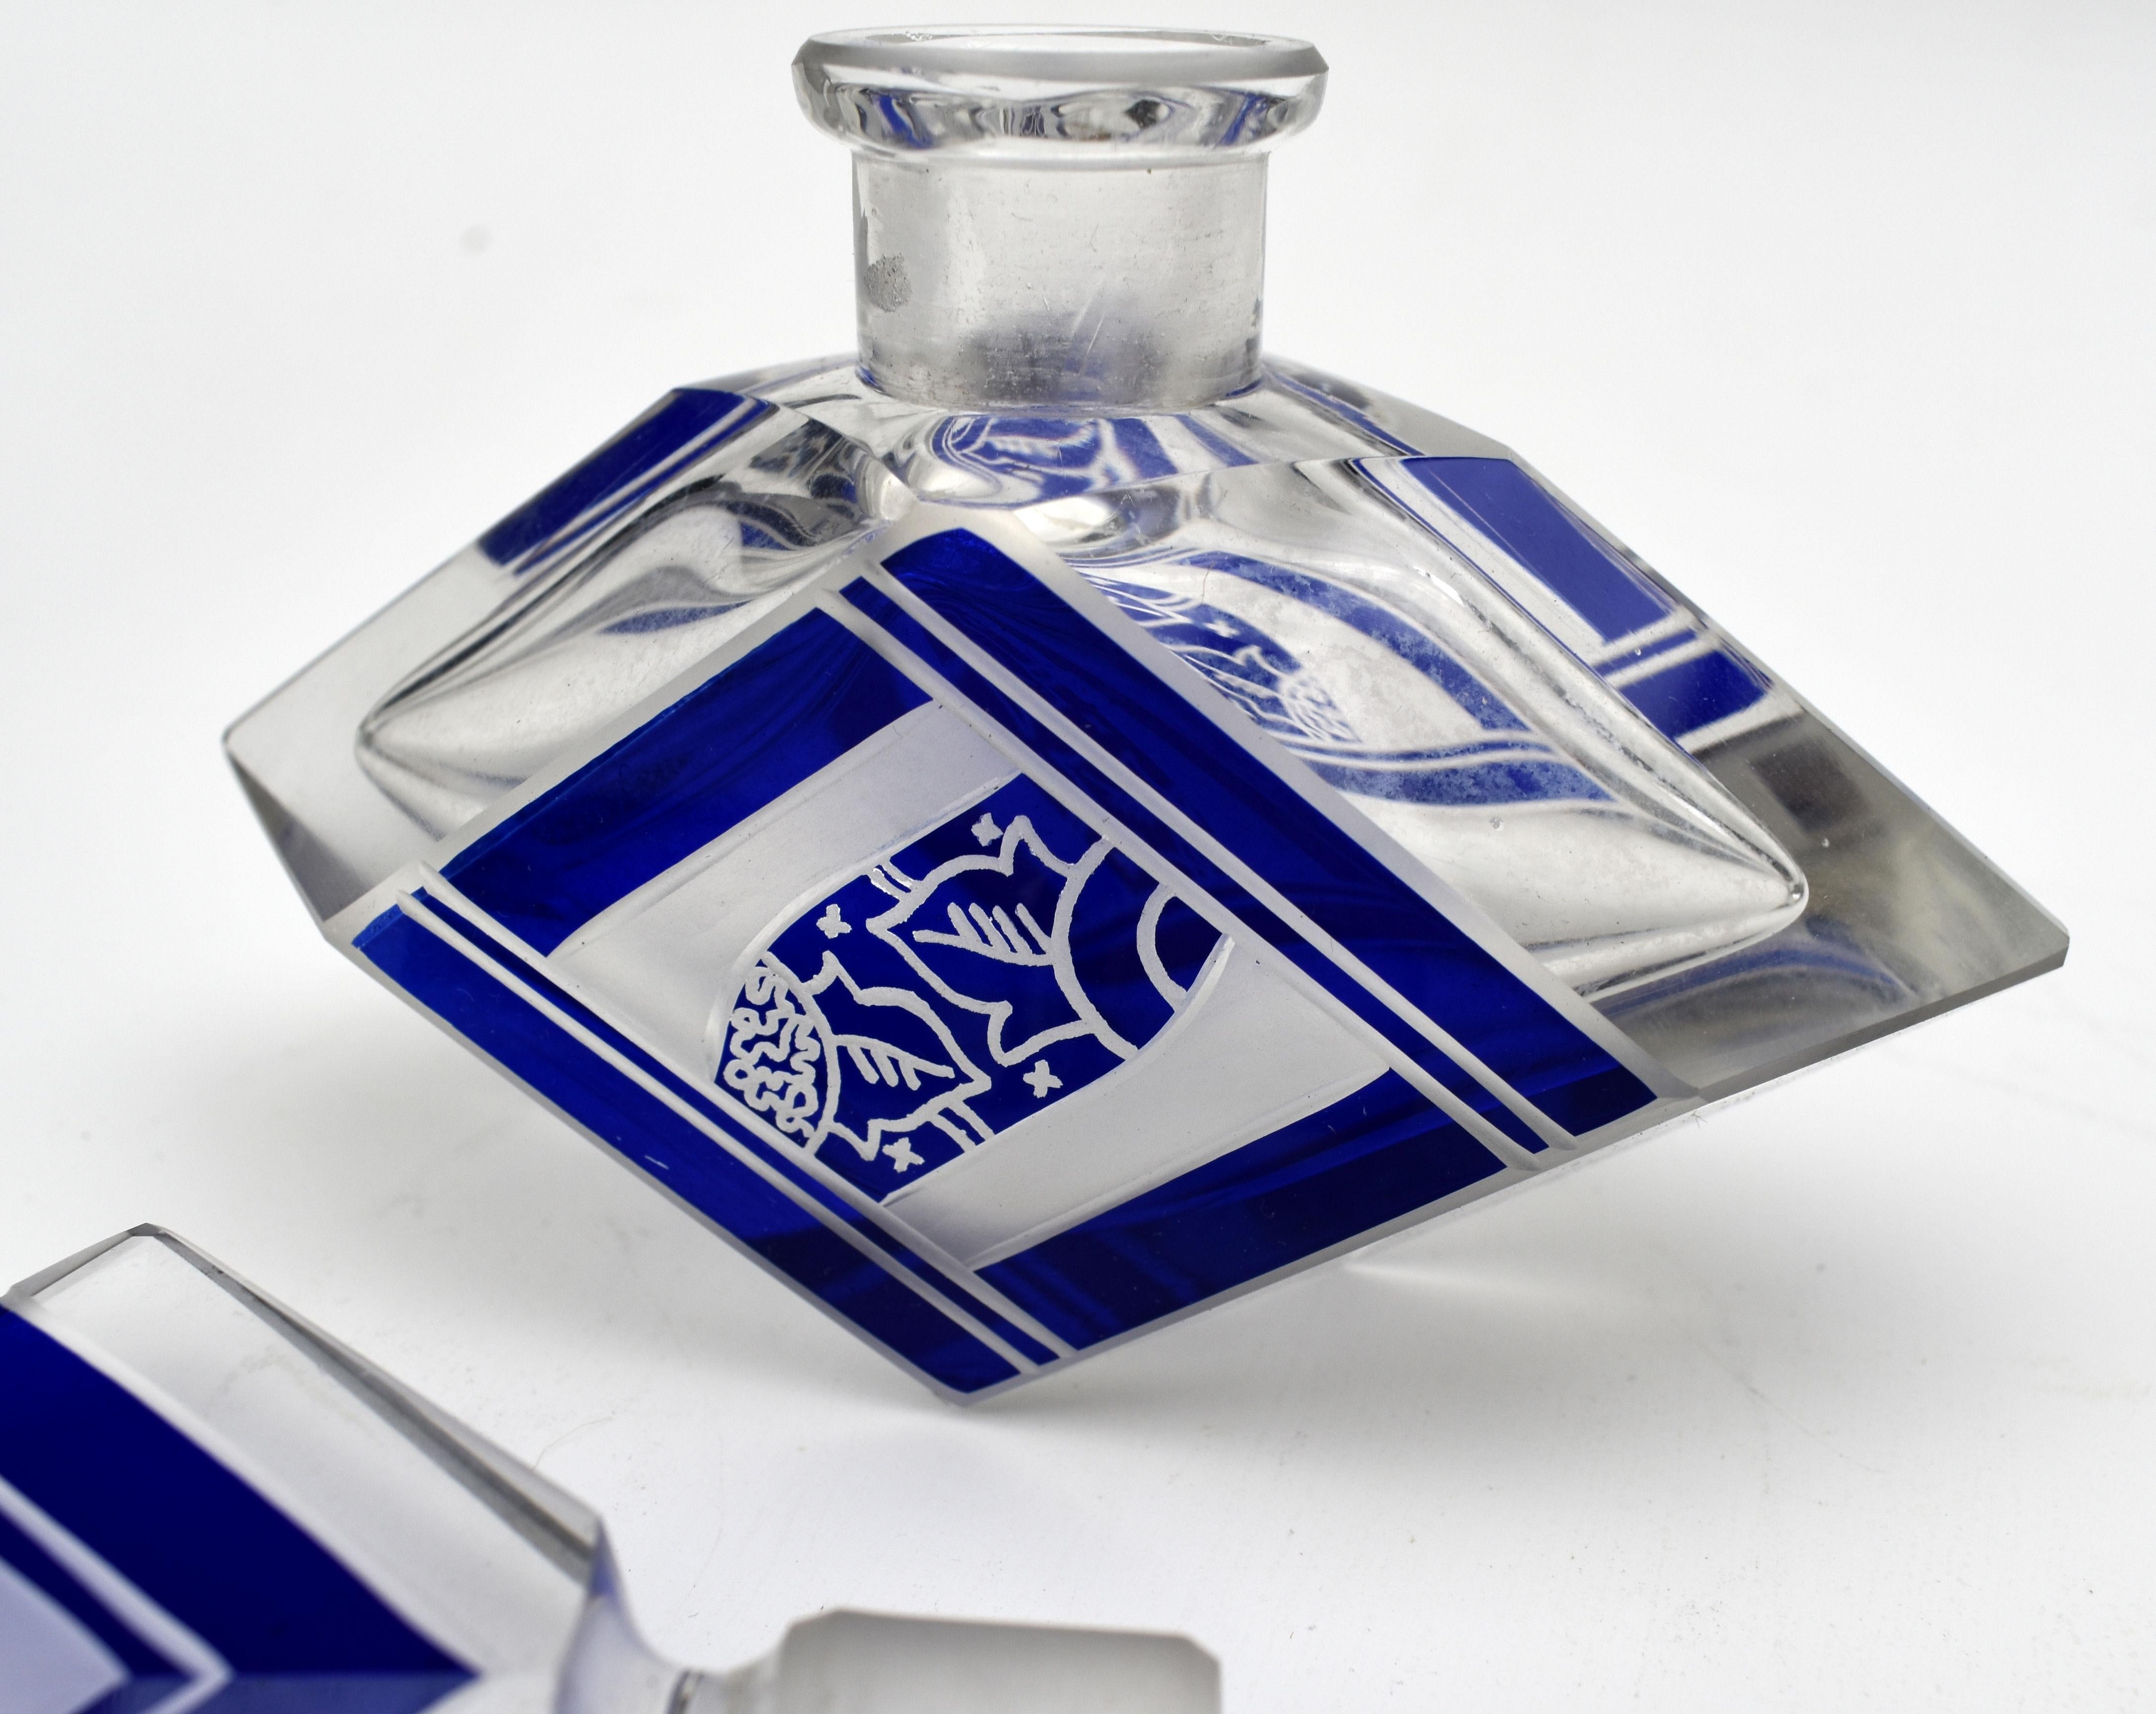 Etched Art Deco Cut Glass Perfume Bottle by Karl Palda, C1930 For Sale